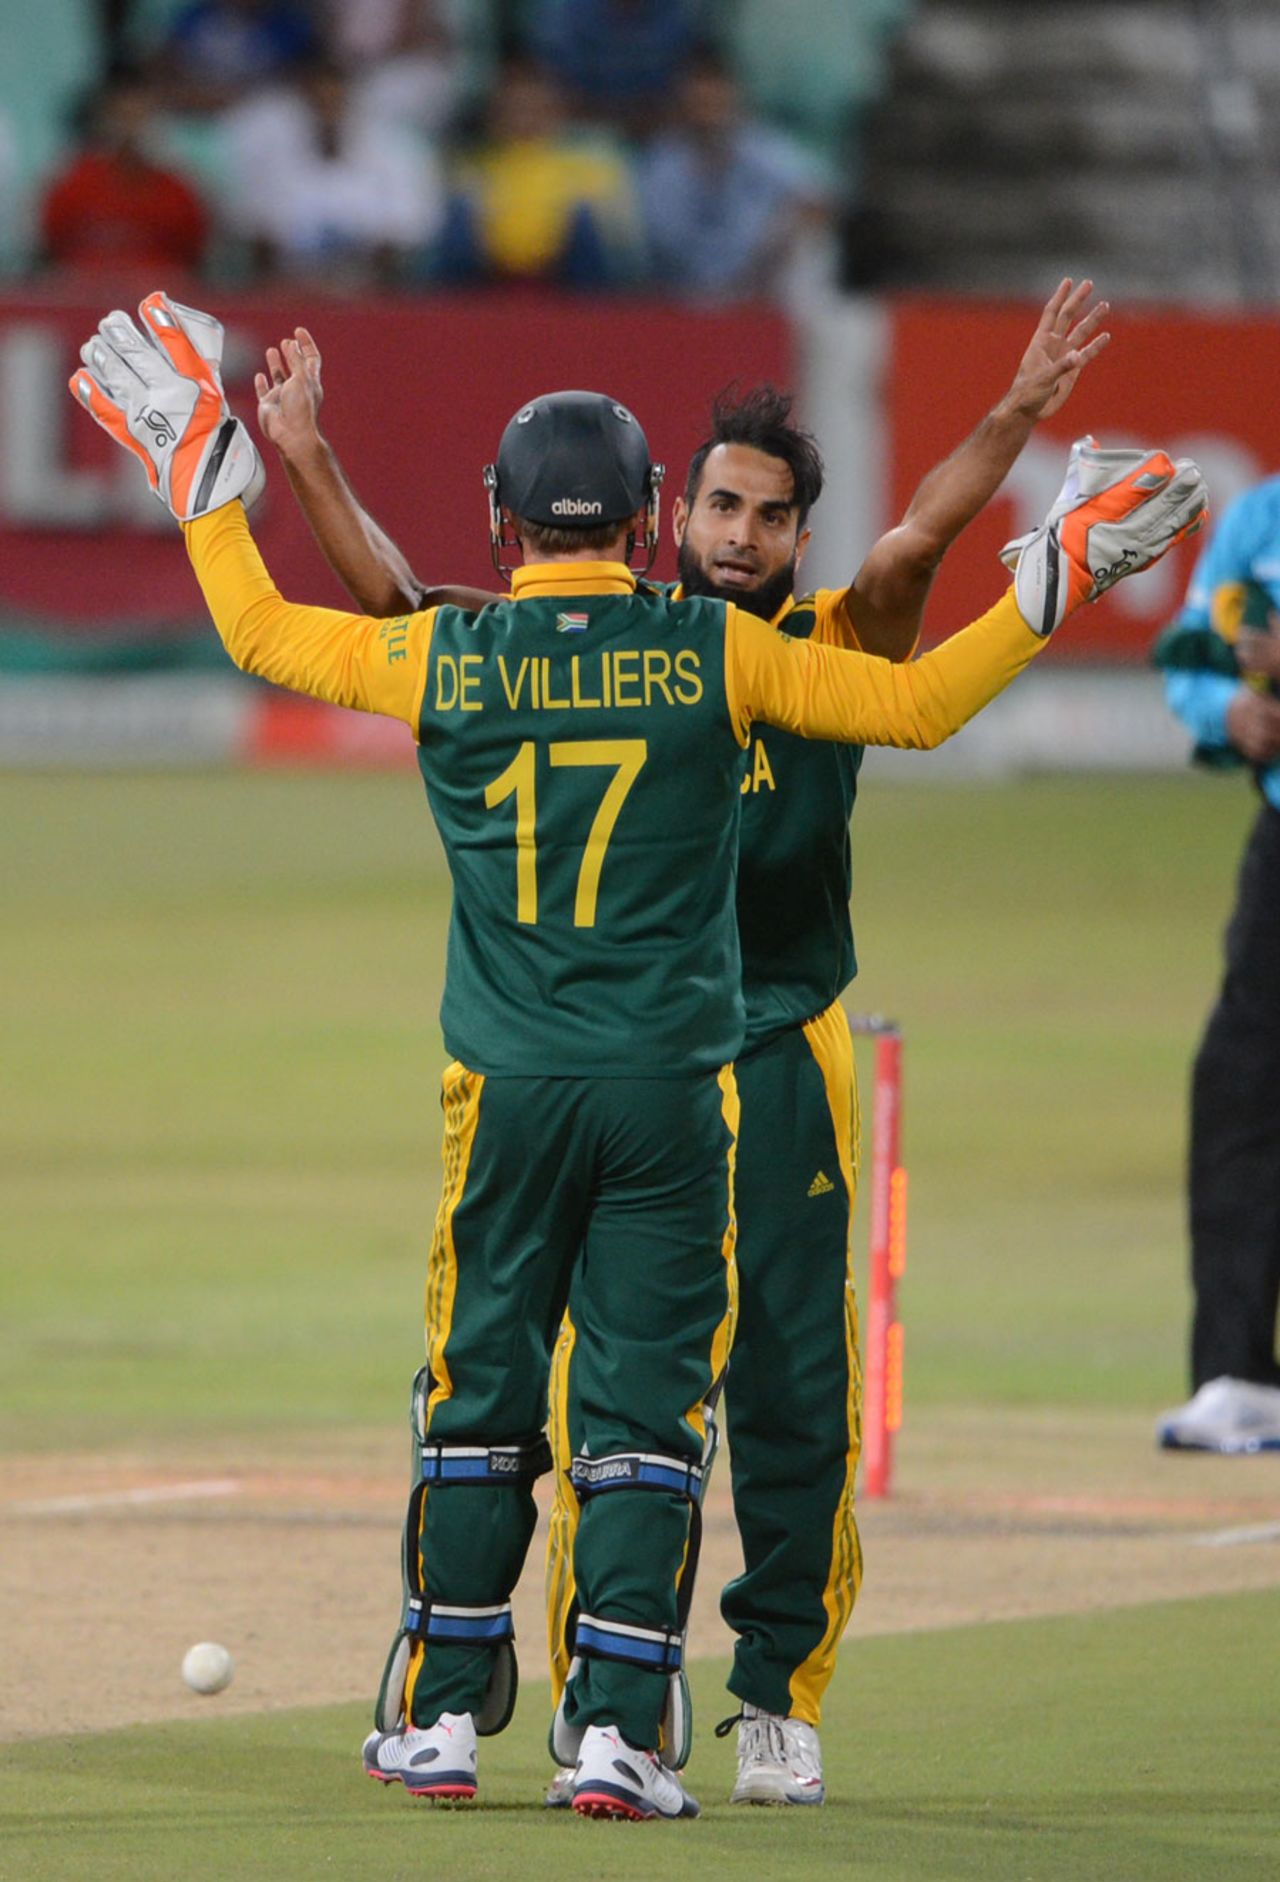 AB de Villiers picked up a stumping and four catches, South Africa v West Indies, 1st ODI, Durban, January 16, 2015